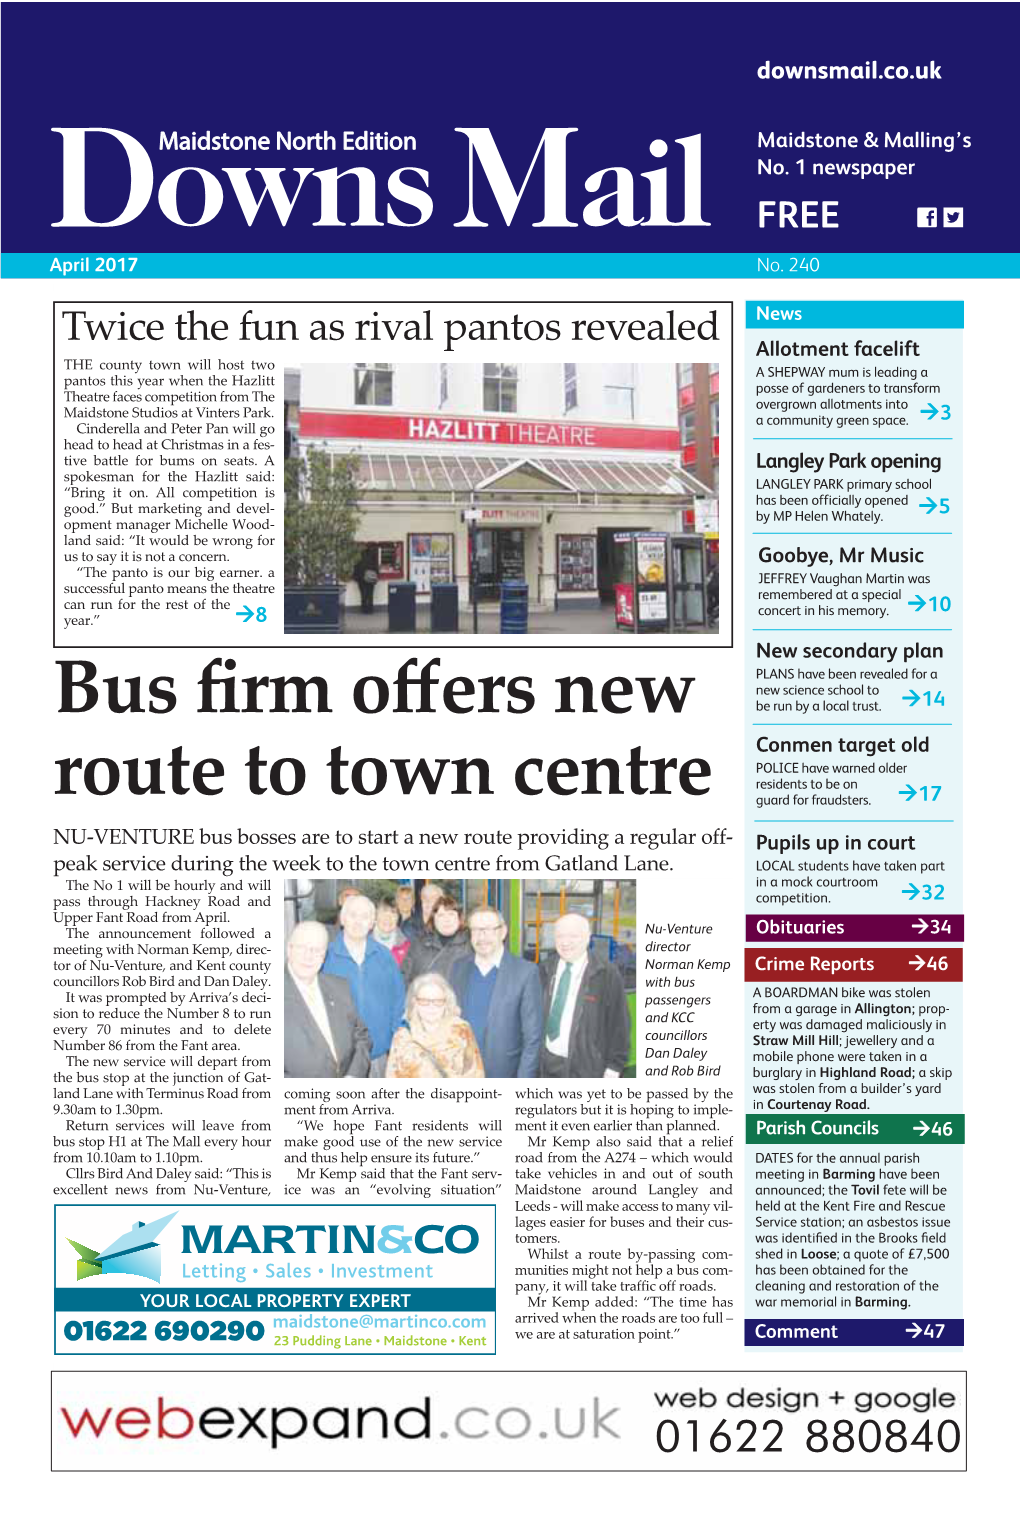 Bus Firm Offers New Route to Town Centre